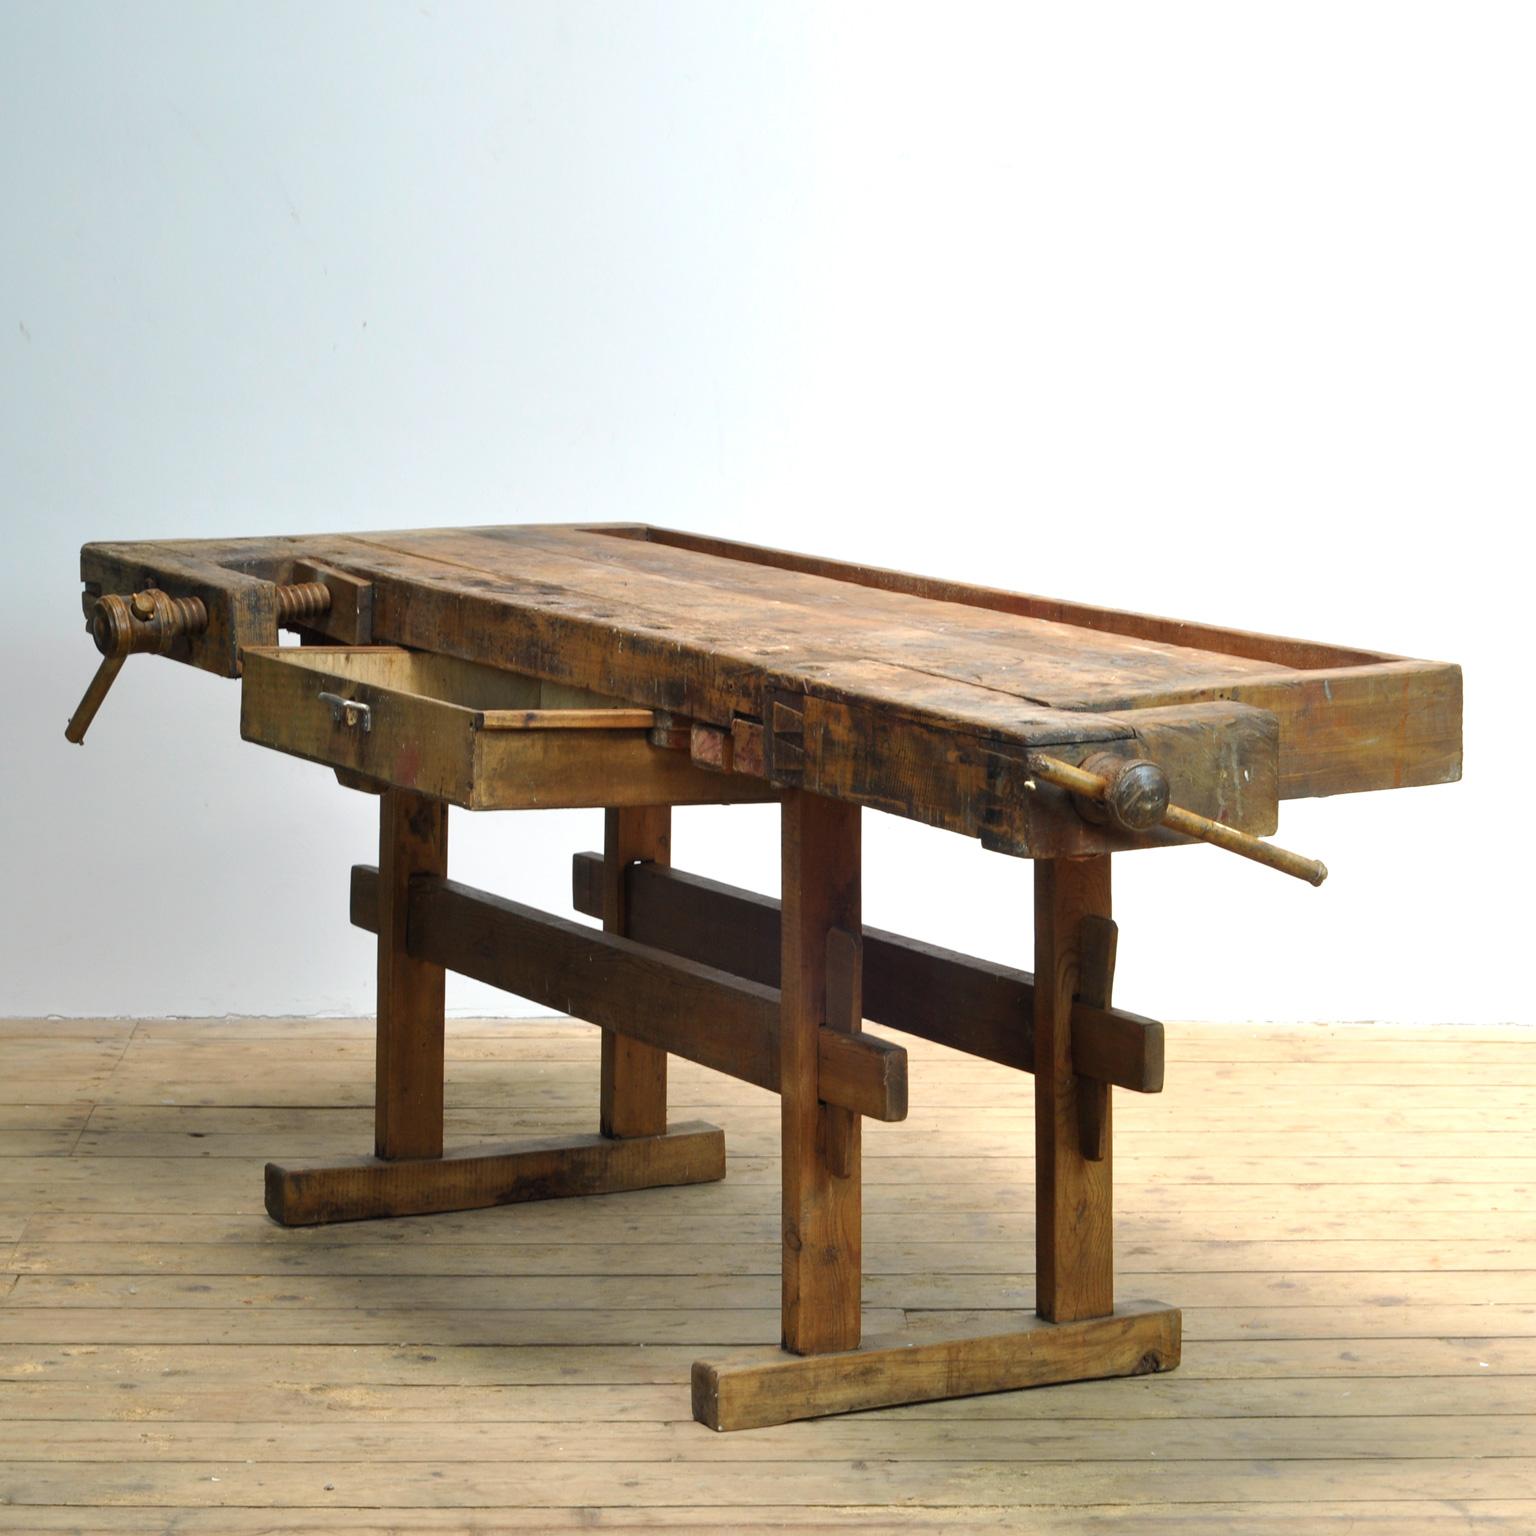 This antique workbench has two built-in wooden vices screws and a recessed tray where the carpenter would put his tools. It was manufactured around 1900. Made from oak. Beautiful patina after years of use. Really nice details in the contruction. The